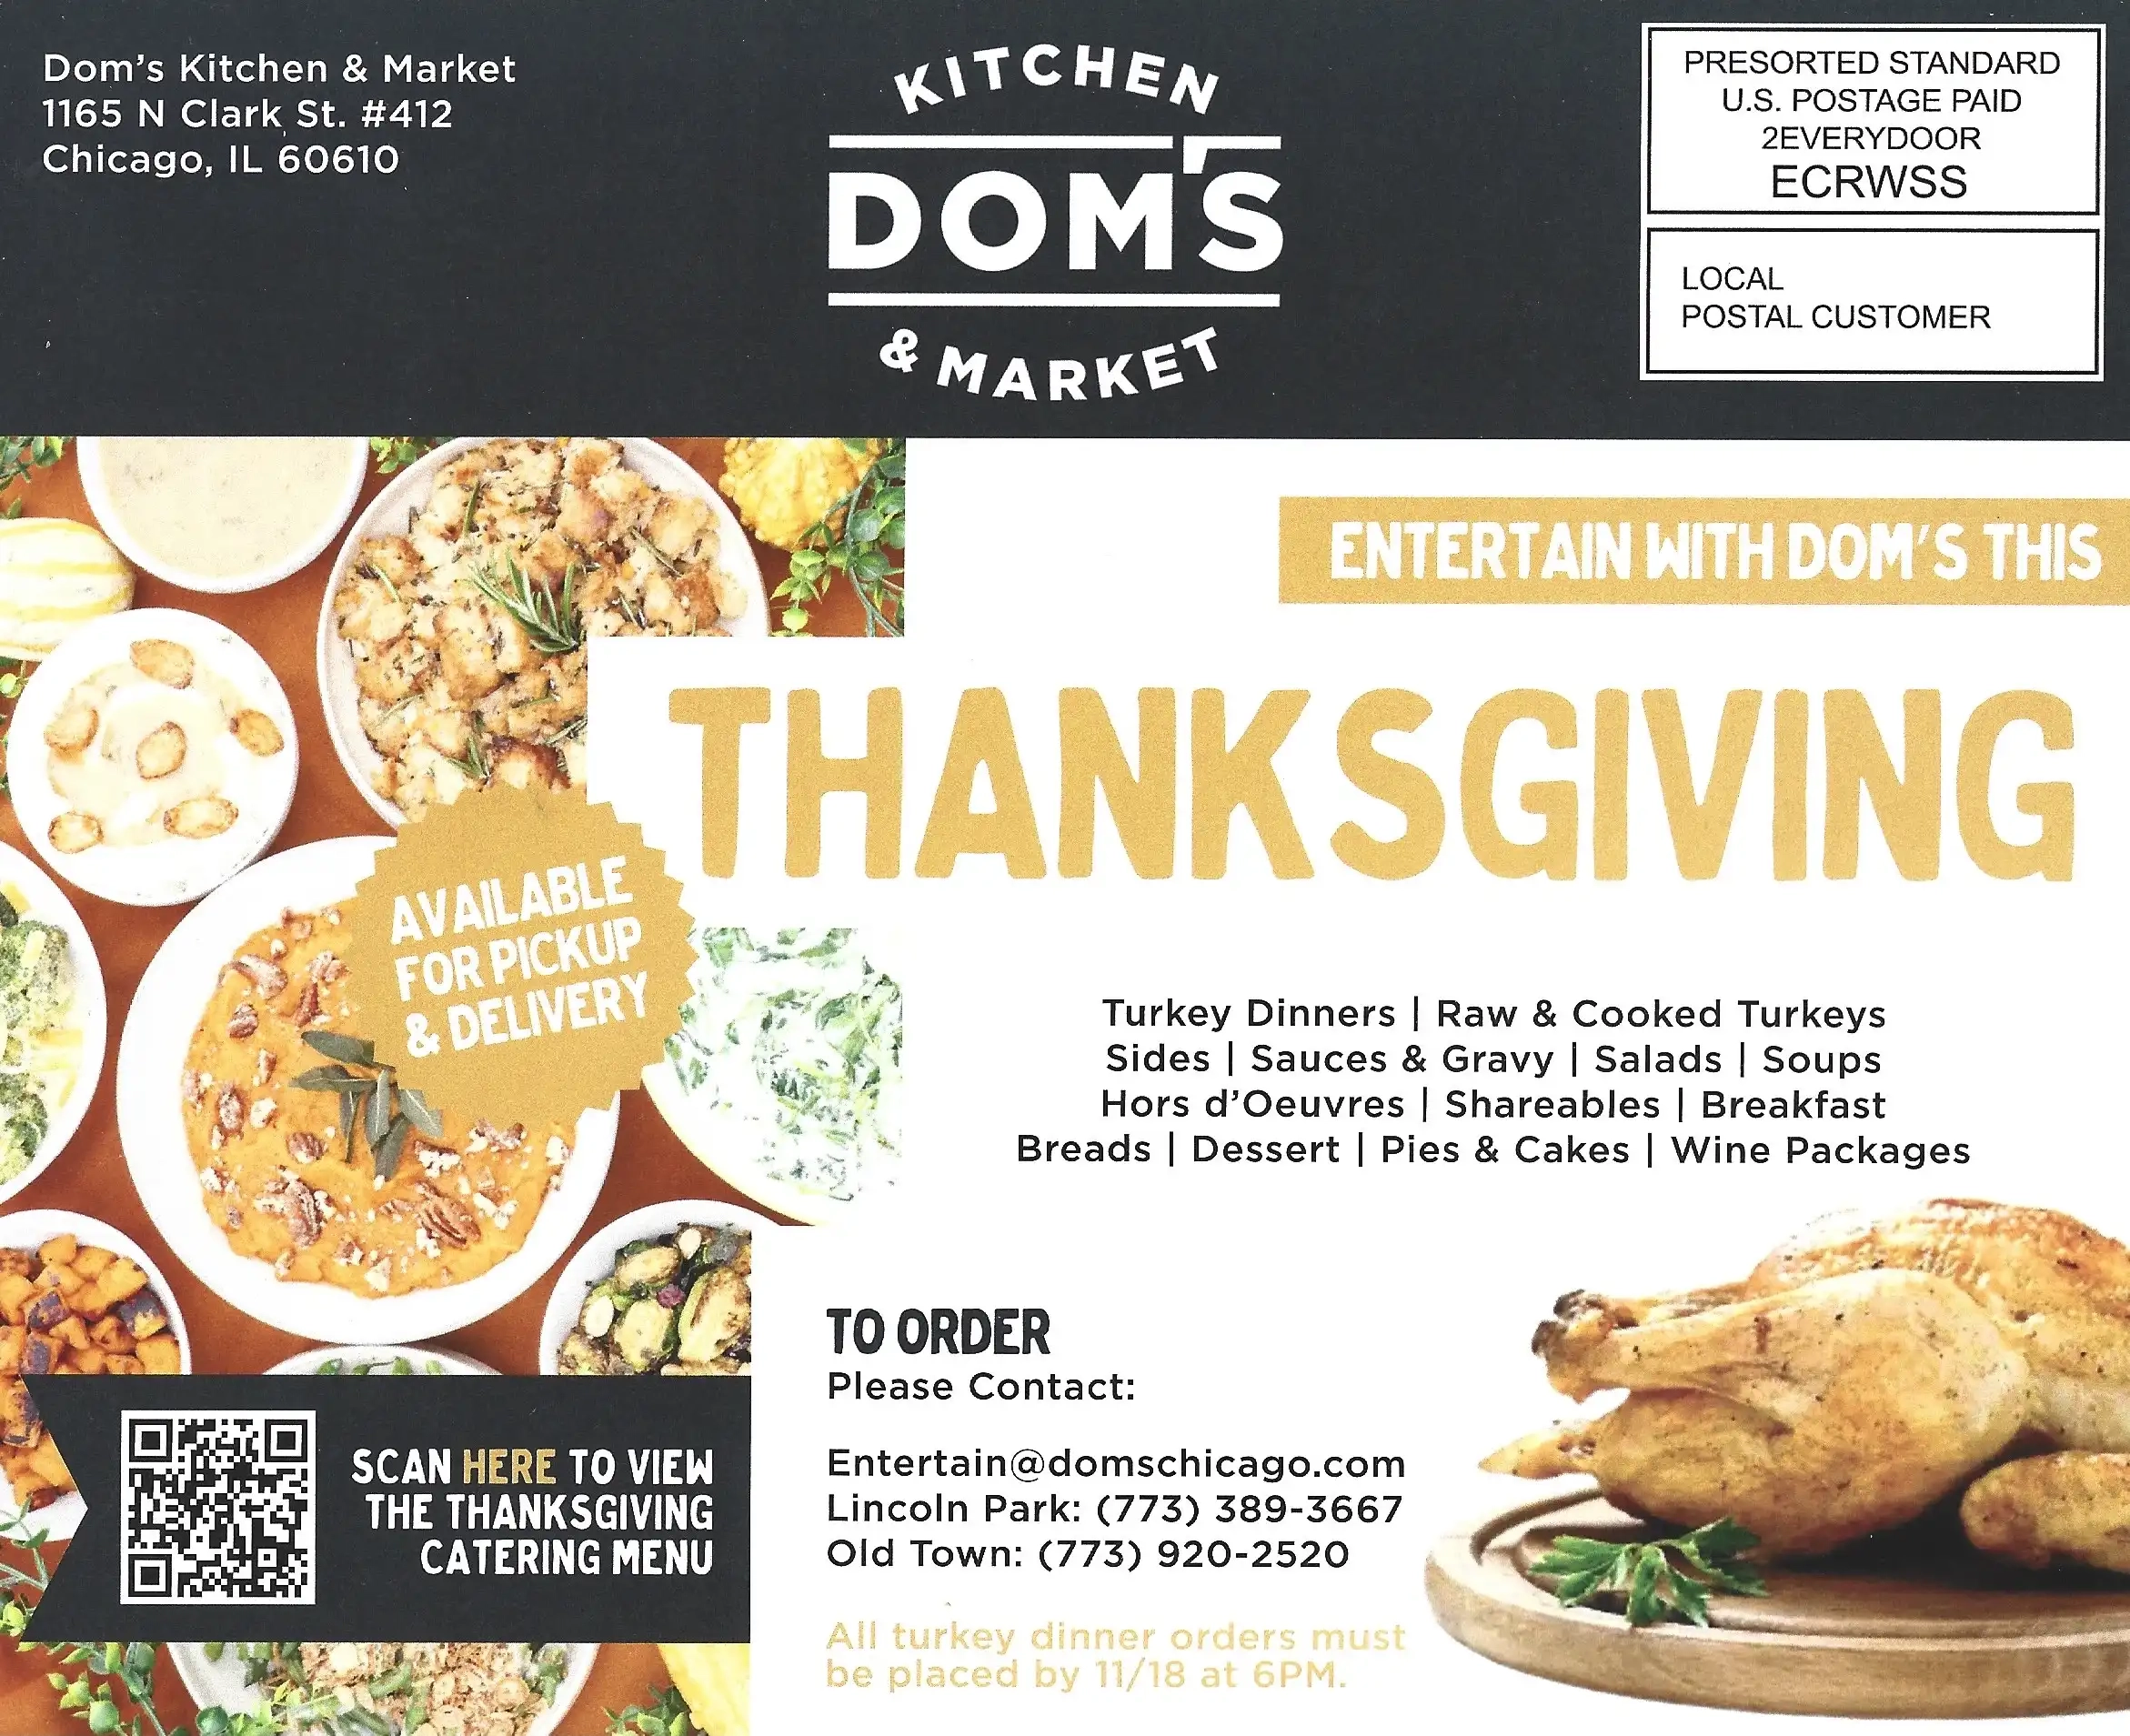 Dom's Kitchen $5 off $25 Shop In Store Coupon